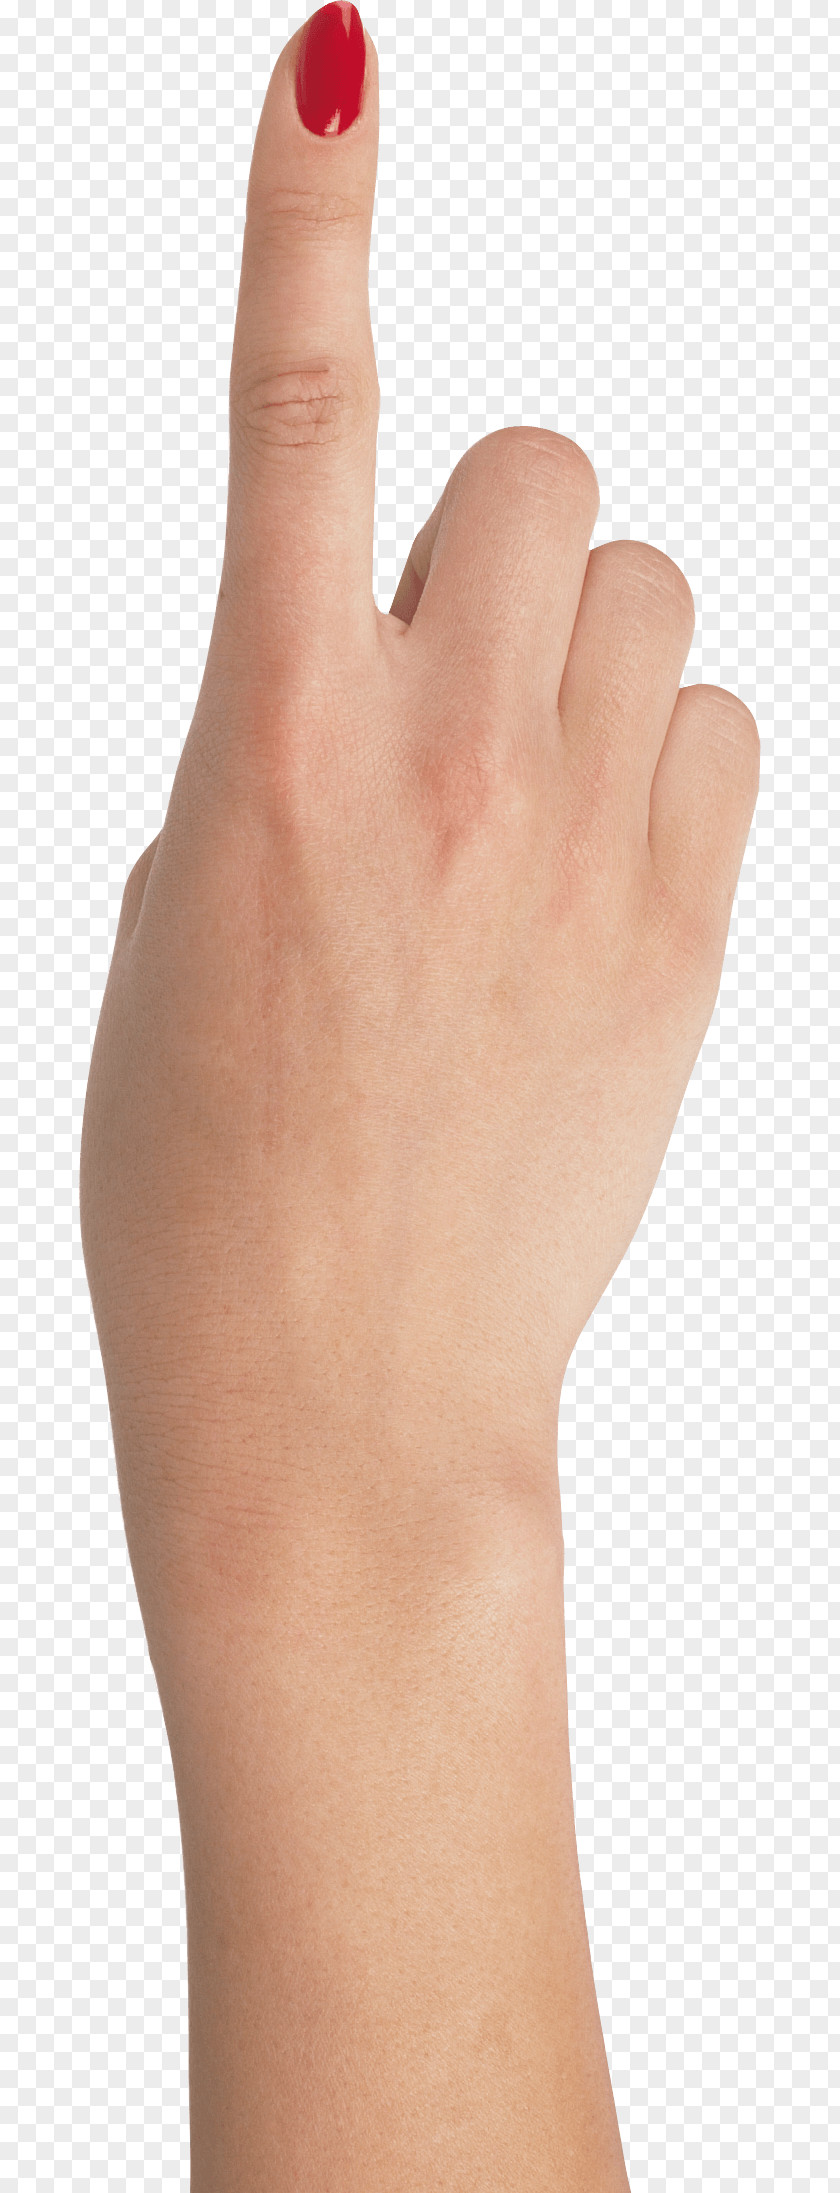 Hands Hand Image Thumb Model Painting PNG